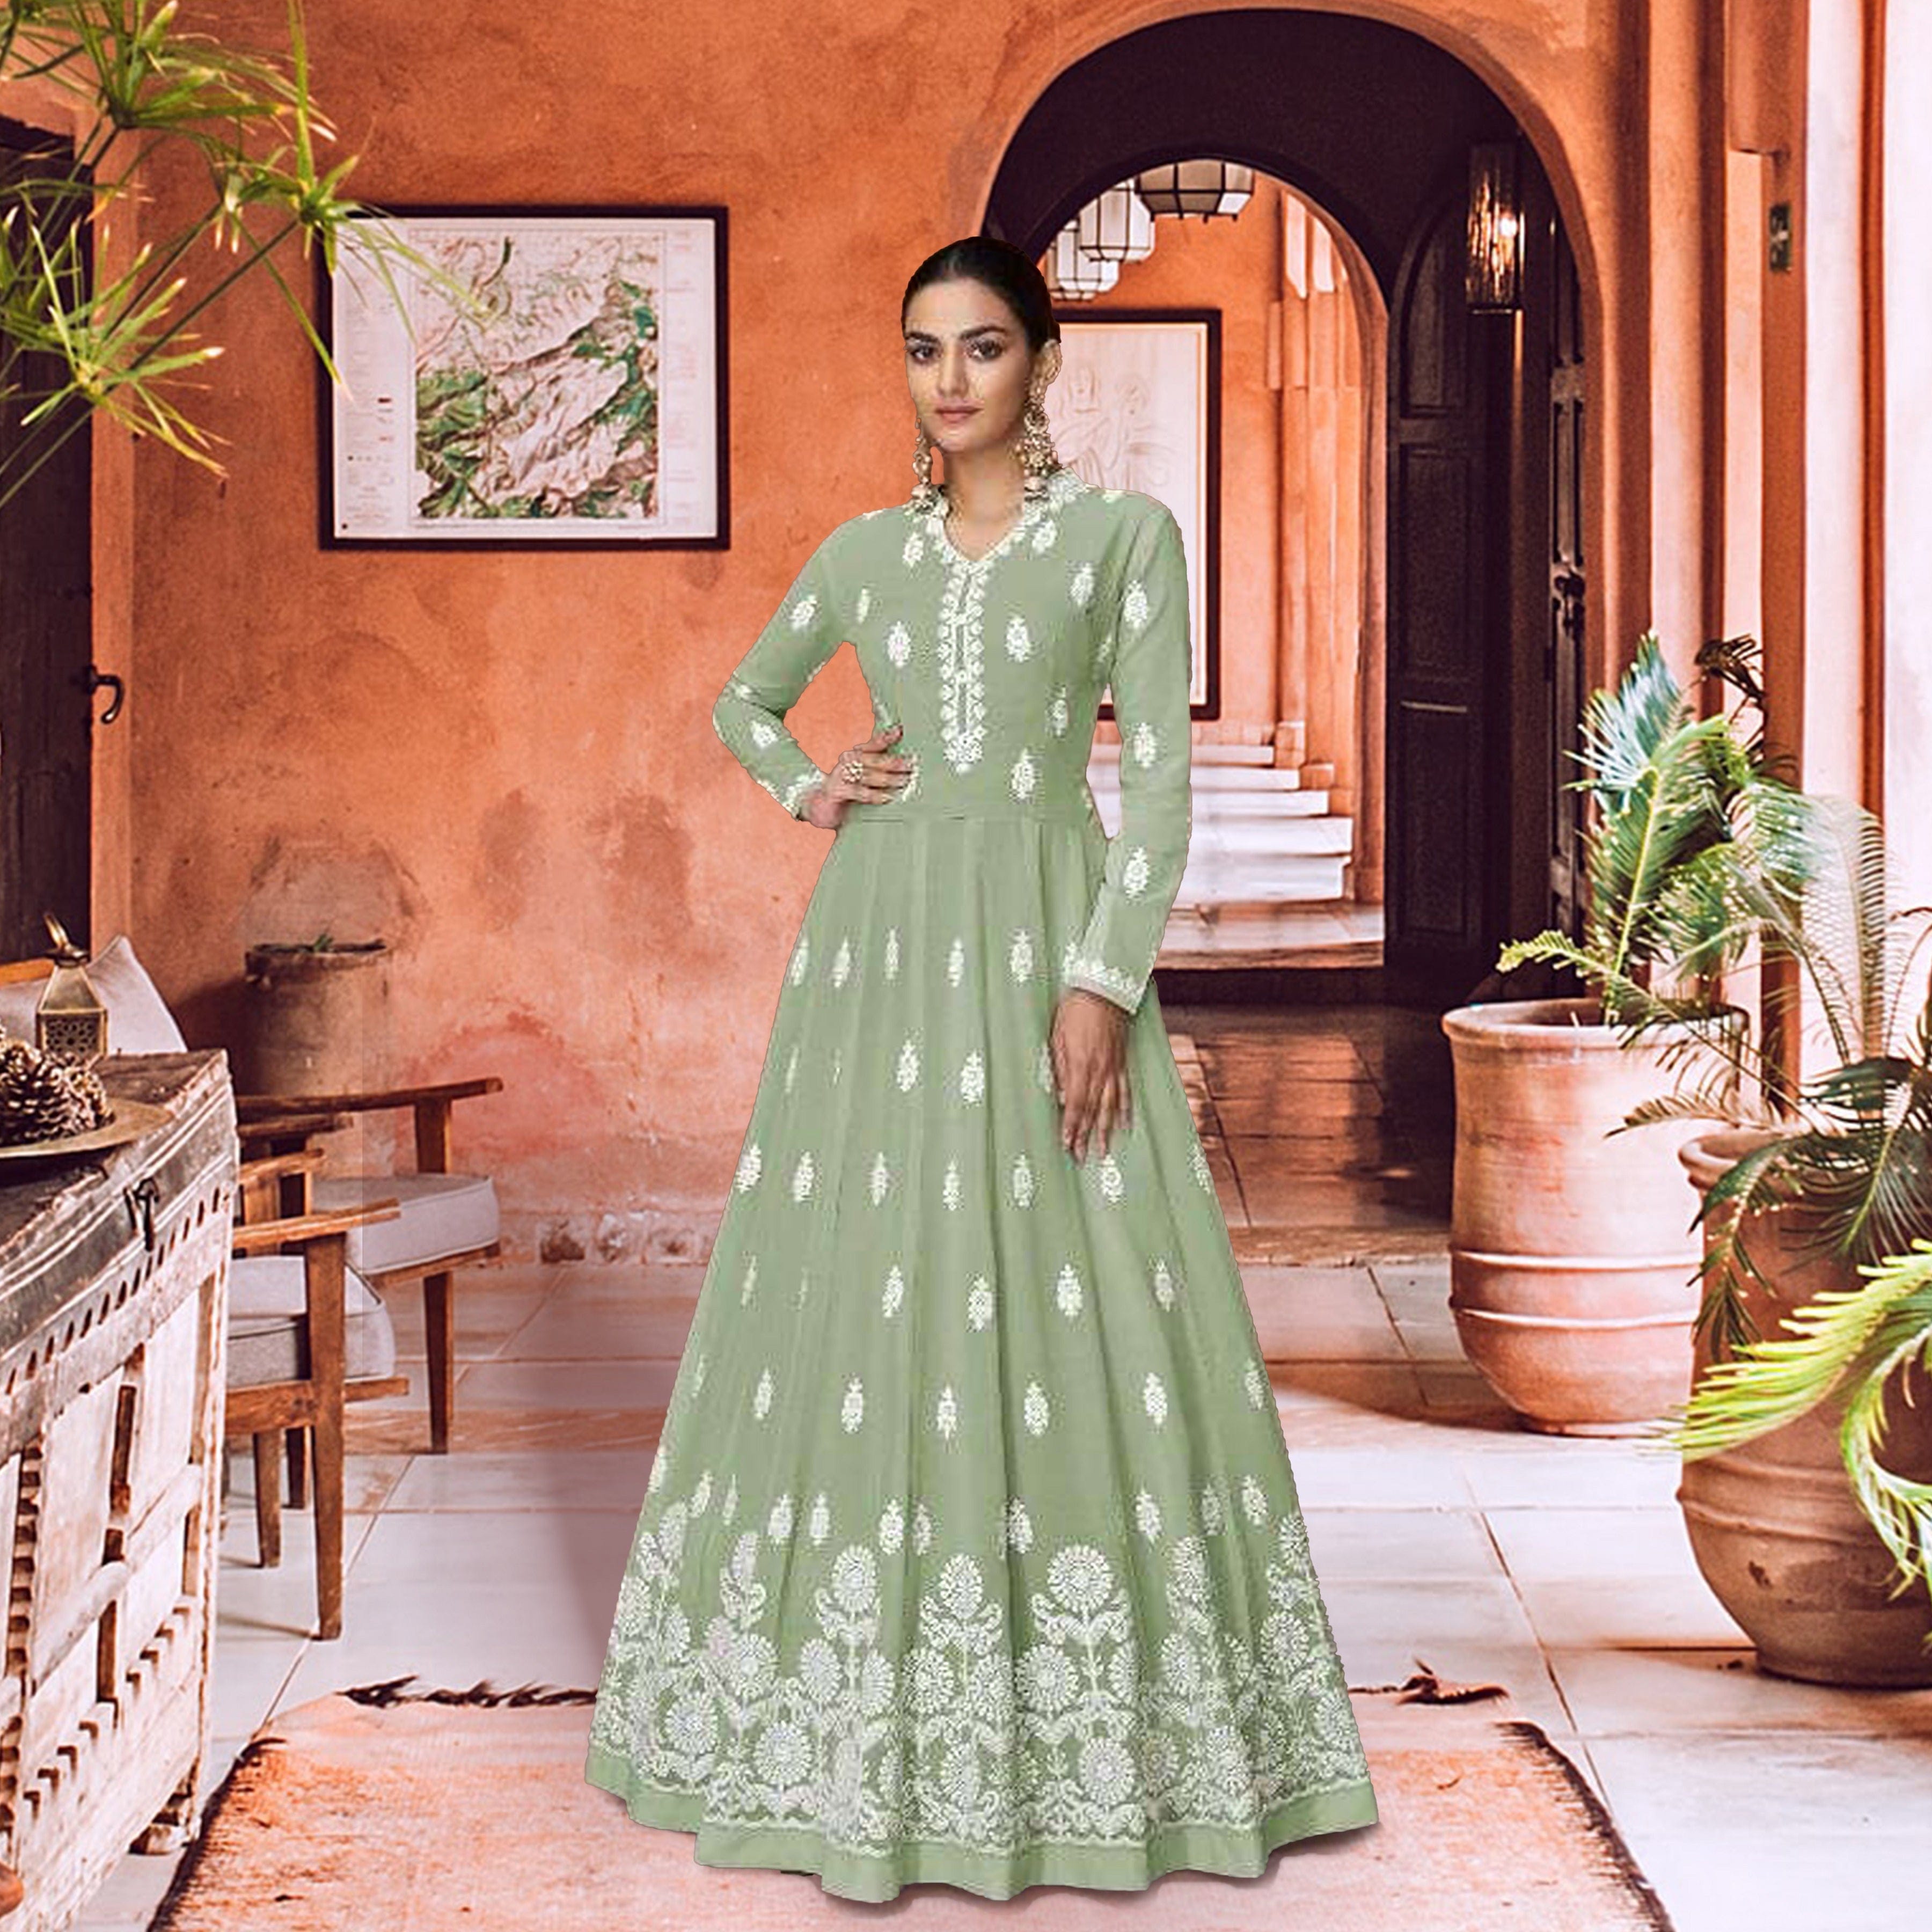 Buy Shasmi Women's Georgette Digital Floral Printed Gown Dress for Women (Gown  Dress 35) (Large, Pista) Light Green at Amazon.in